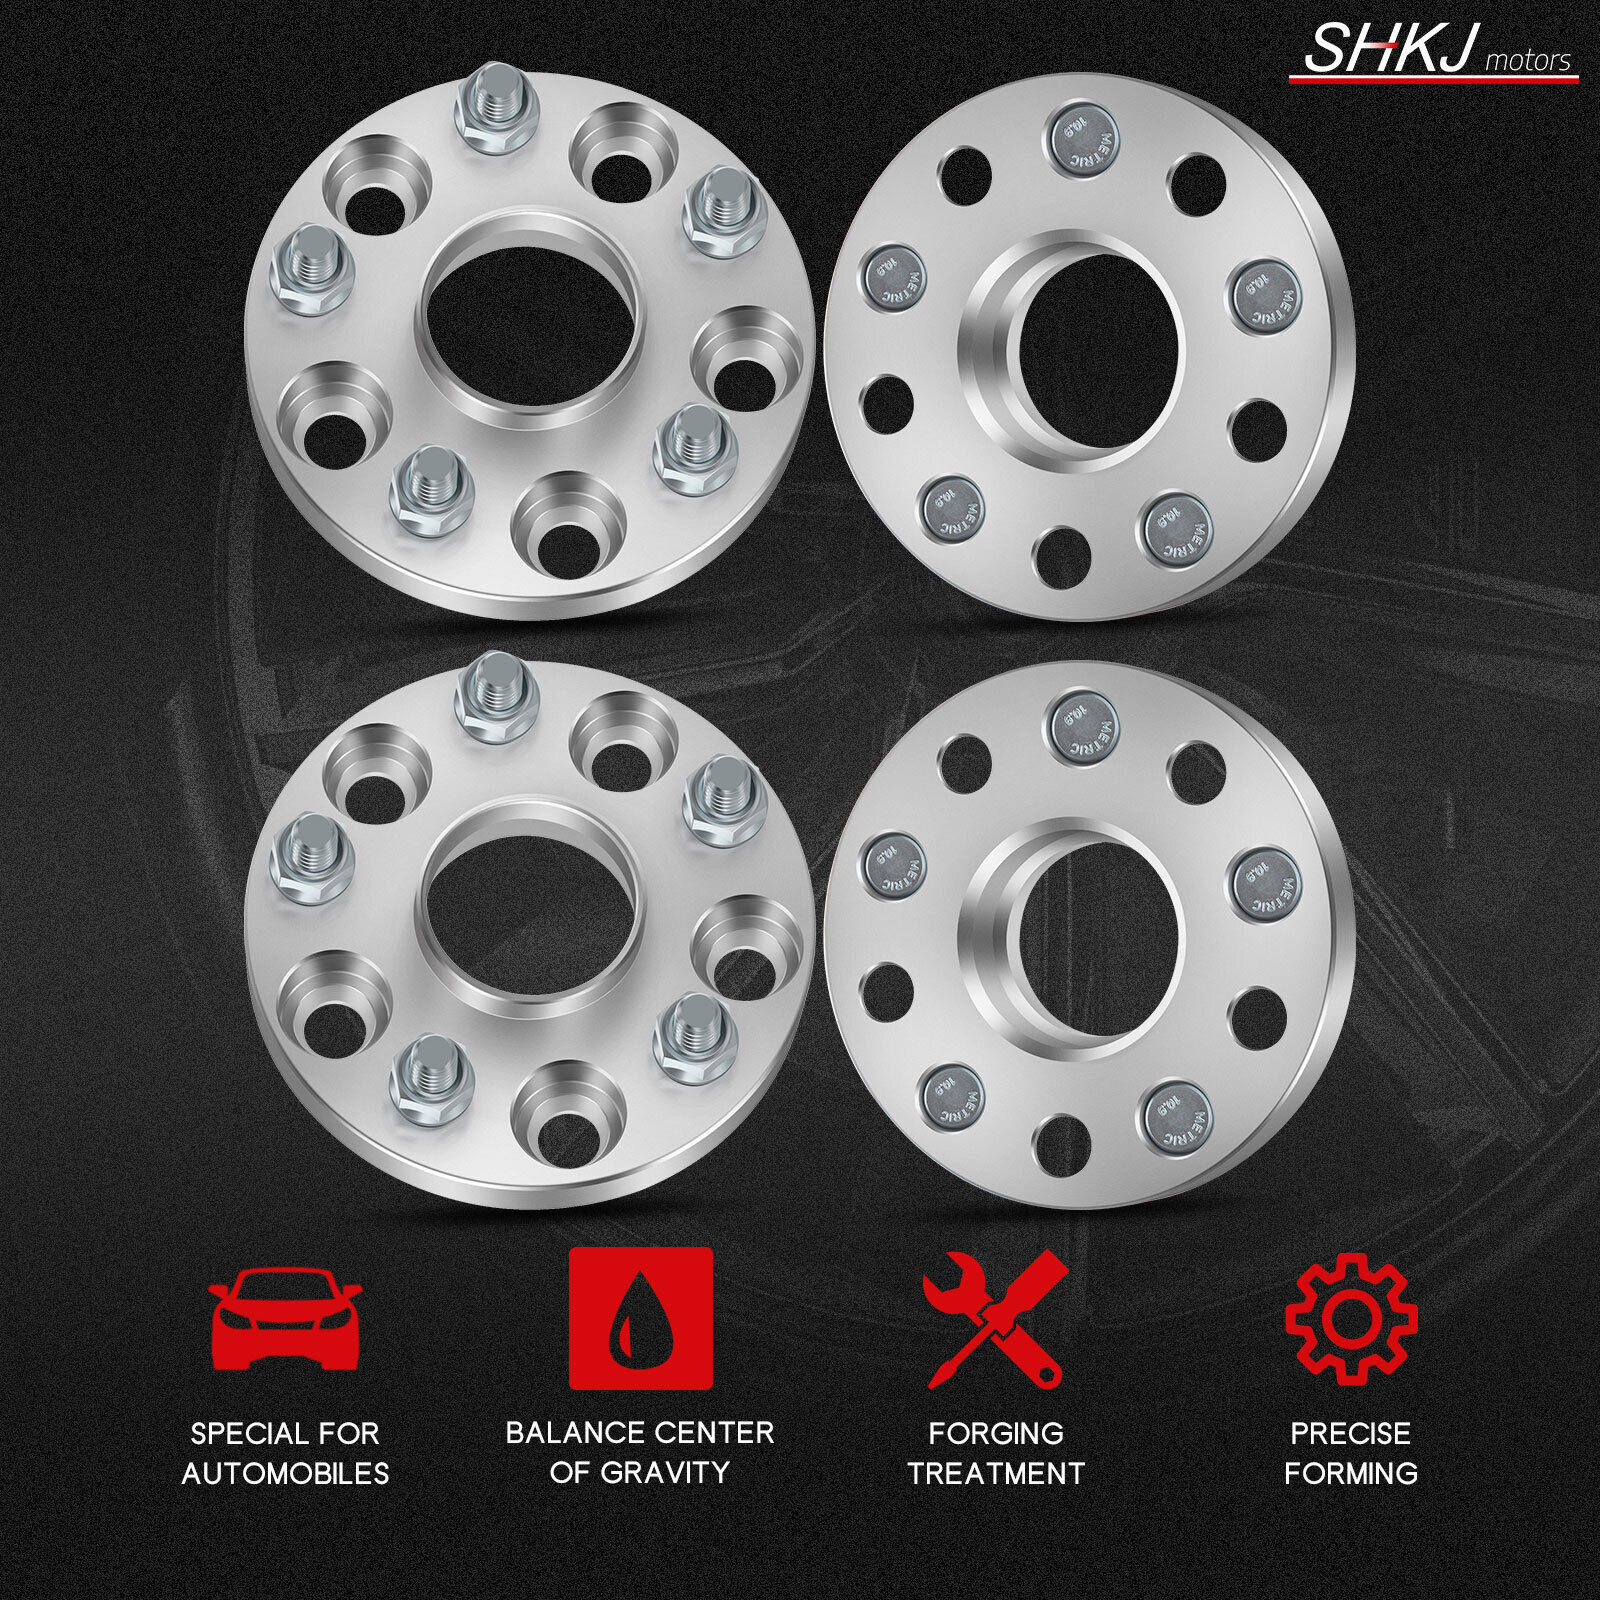 (4) 20MM Wheel Spacers 5X4.5 5X114.3 12X1.5 For Lexus GS300 ES300 IS250 Tacoma